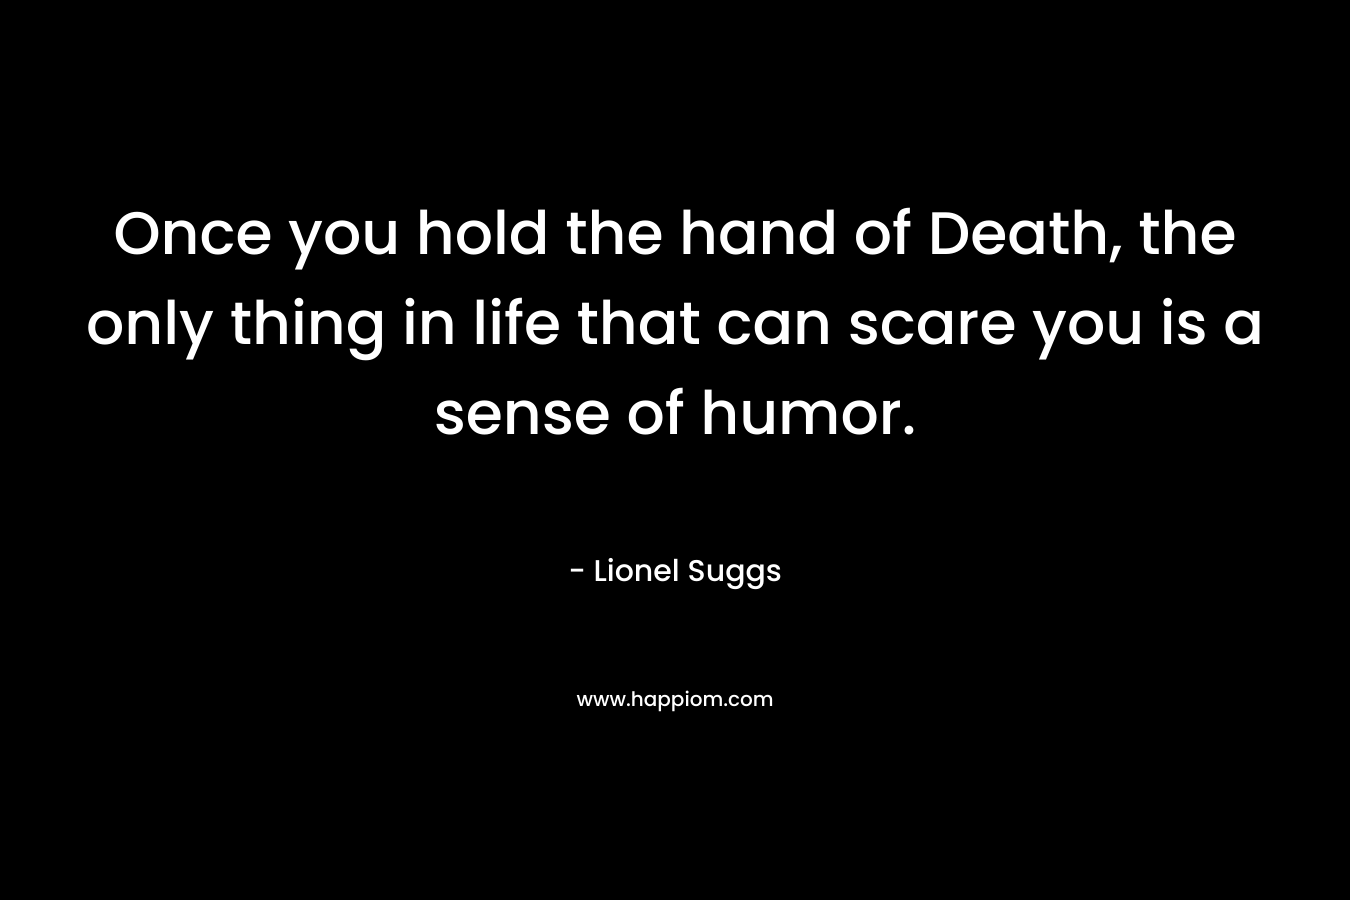 Once you hold the hand of Death, the only thing in life that can scare you is a sense of humor.